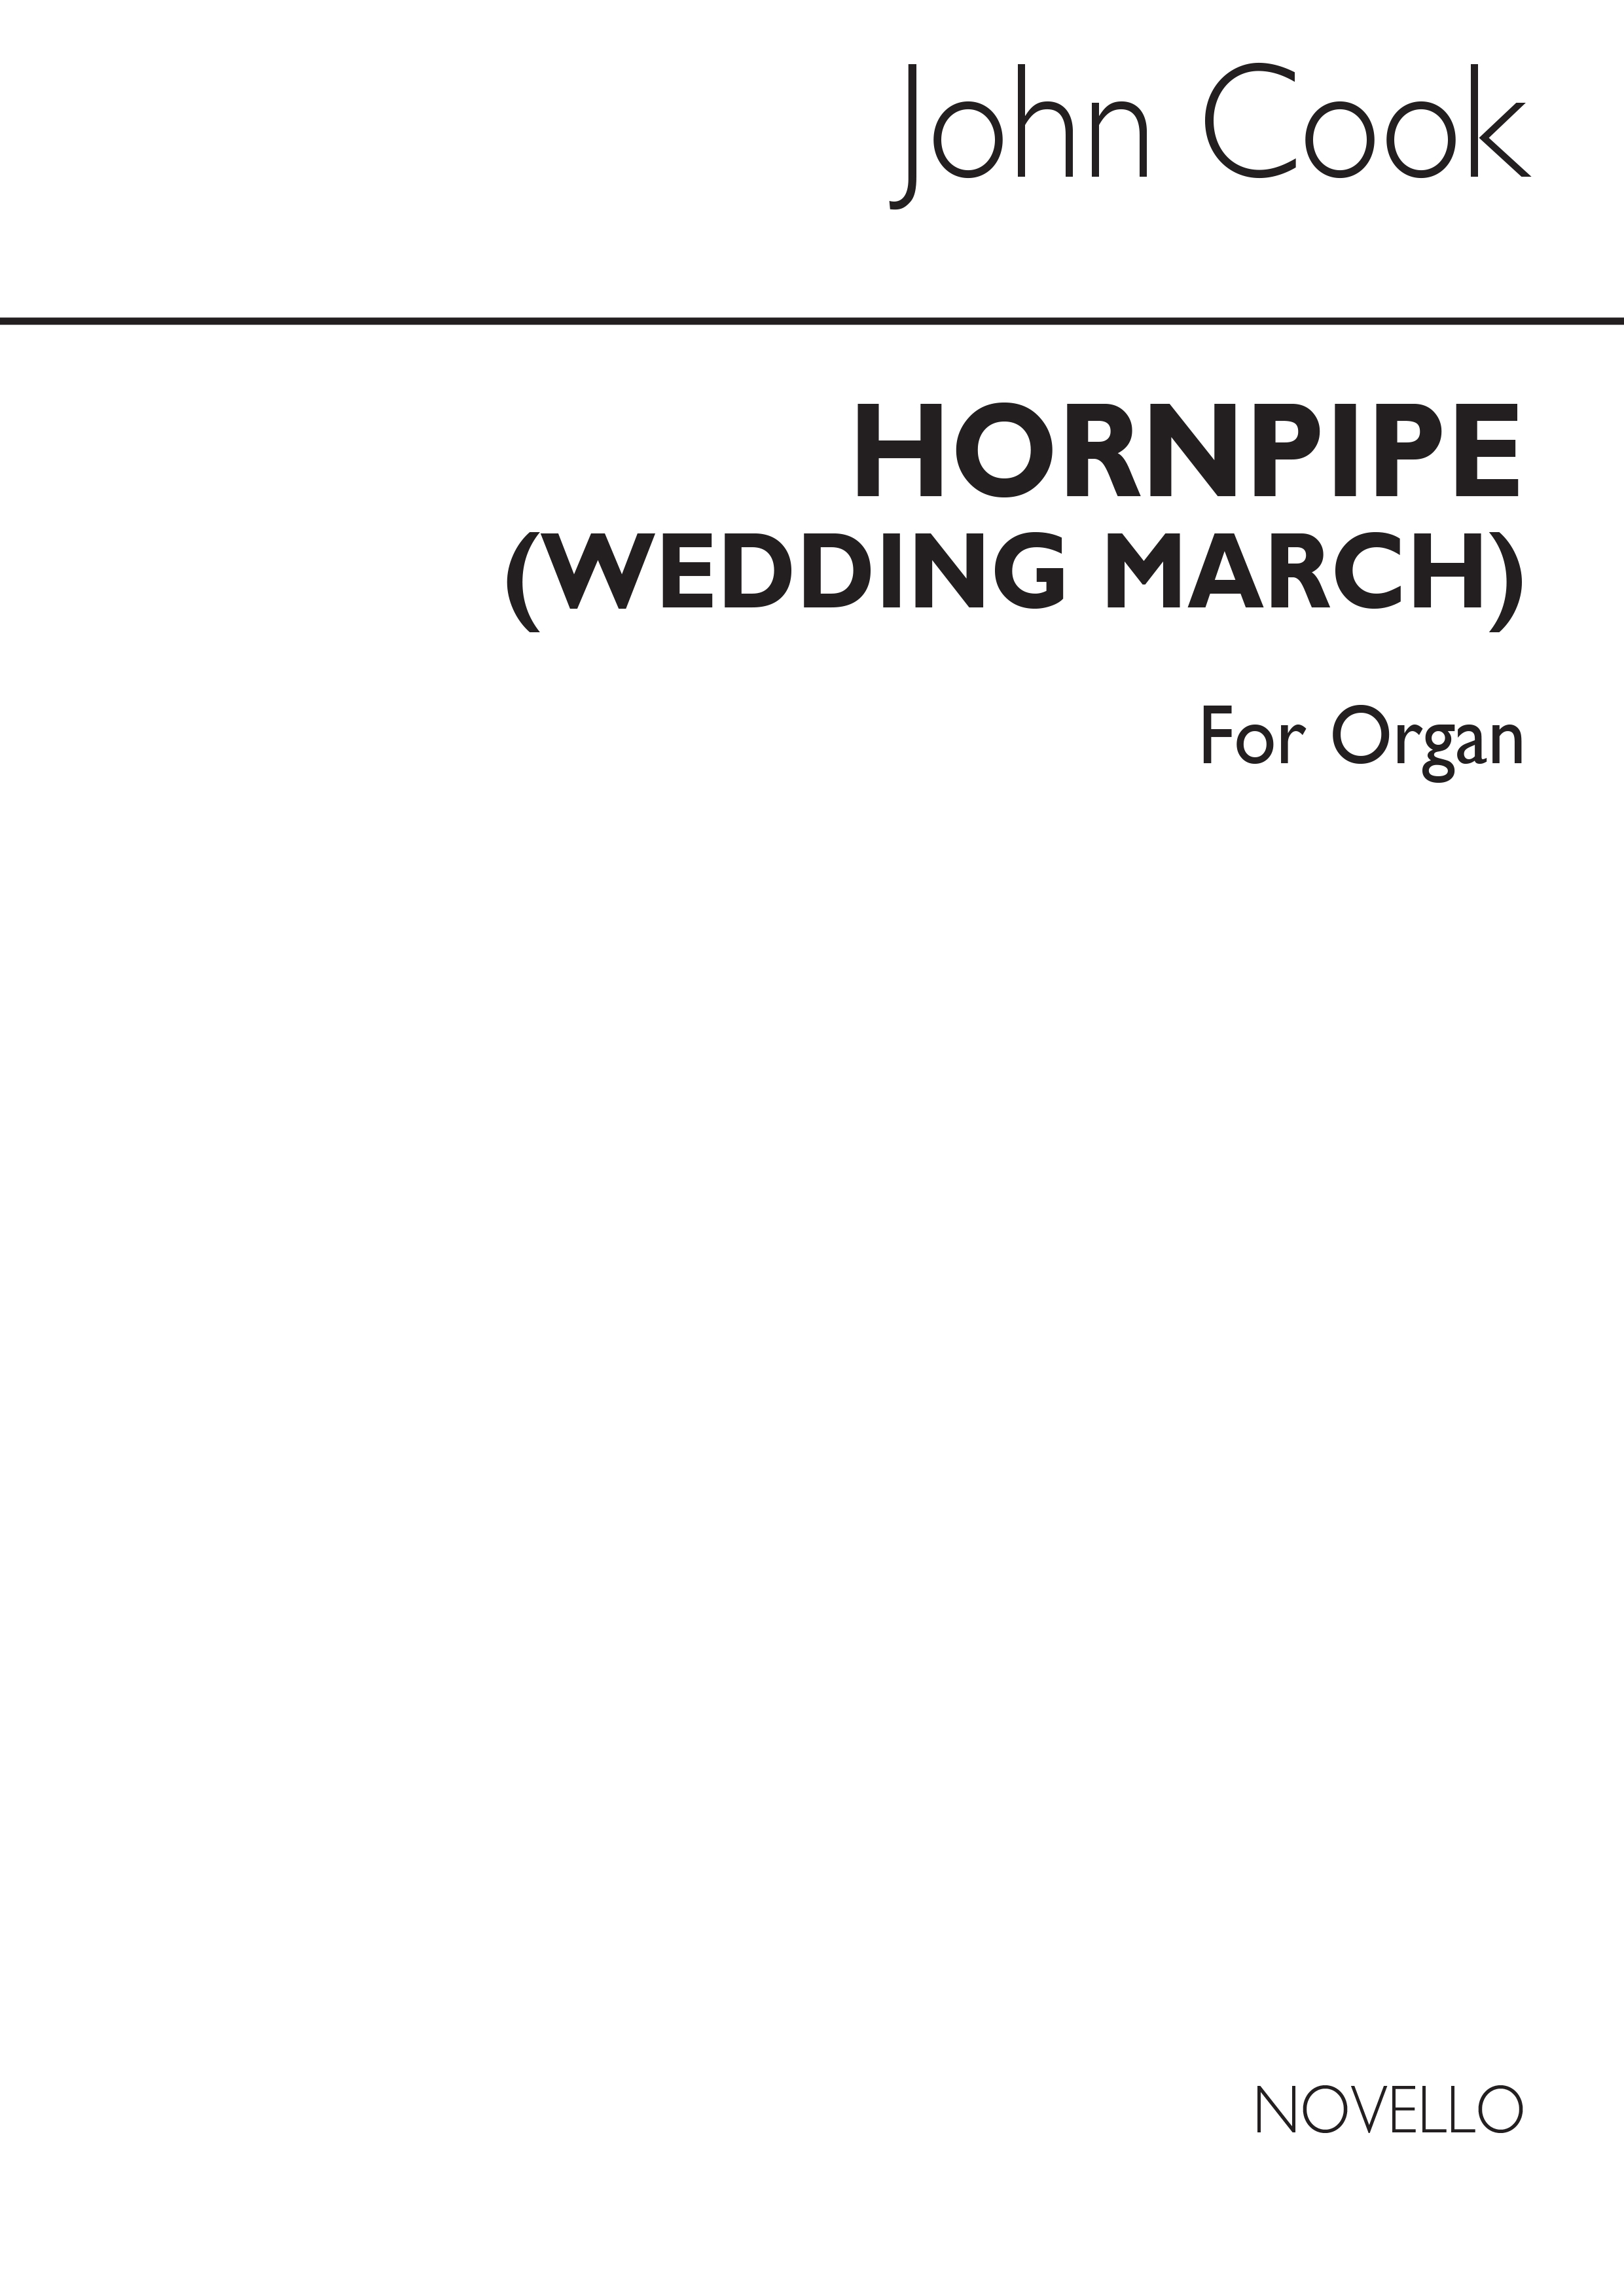 John Ernest Cook: Mr. Purcell's Wedding March (Hornipe) For Organ